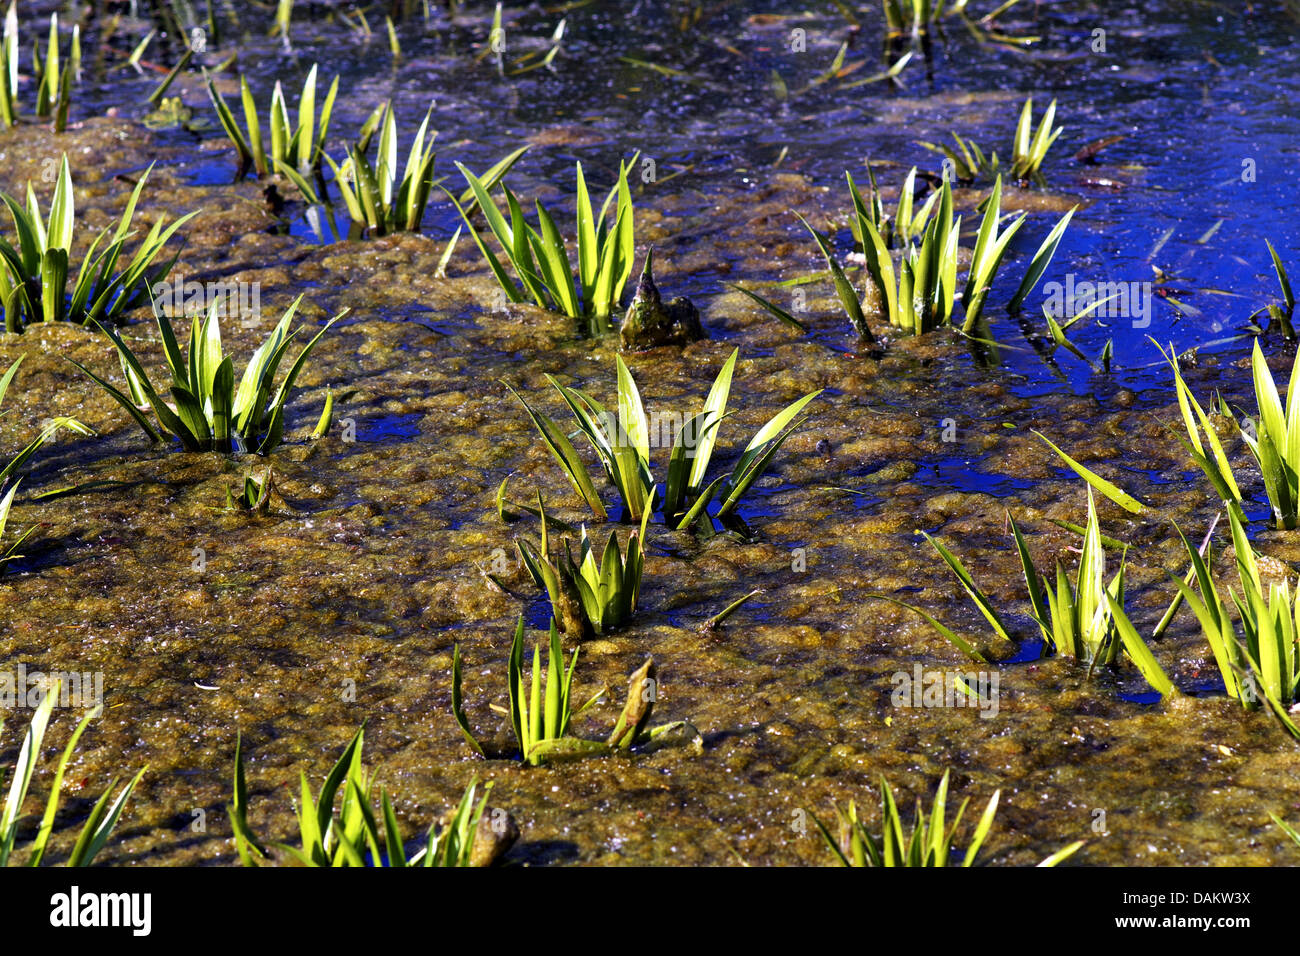 crab's-claw, water-soldier (Stratiotes aloides), on a pond, Germany Stock Photo